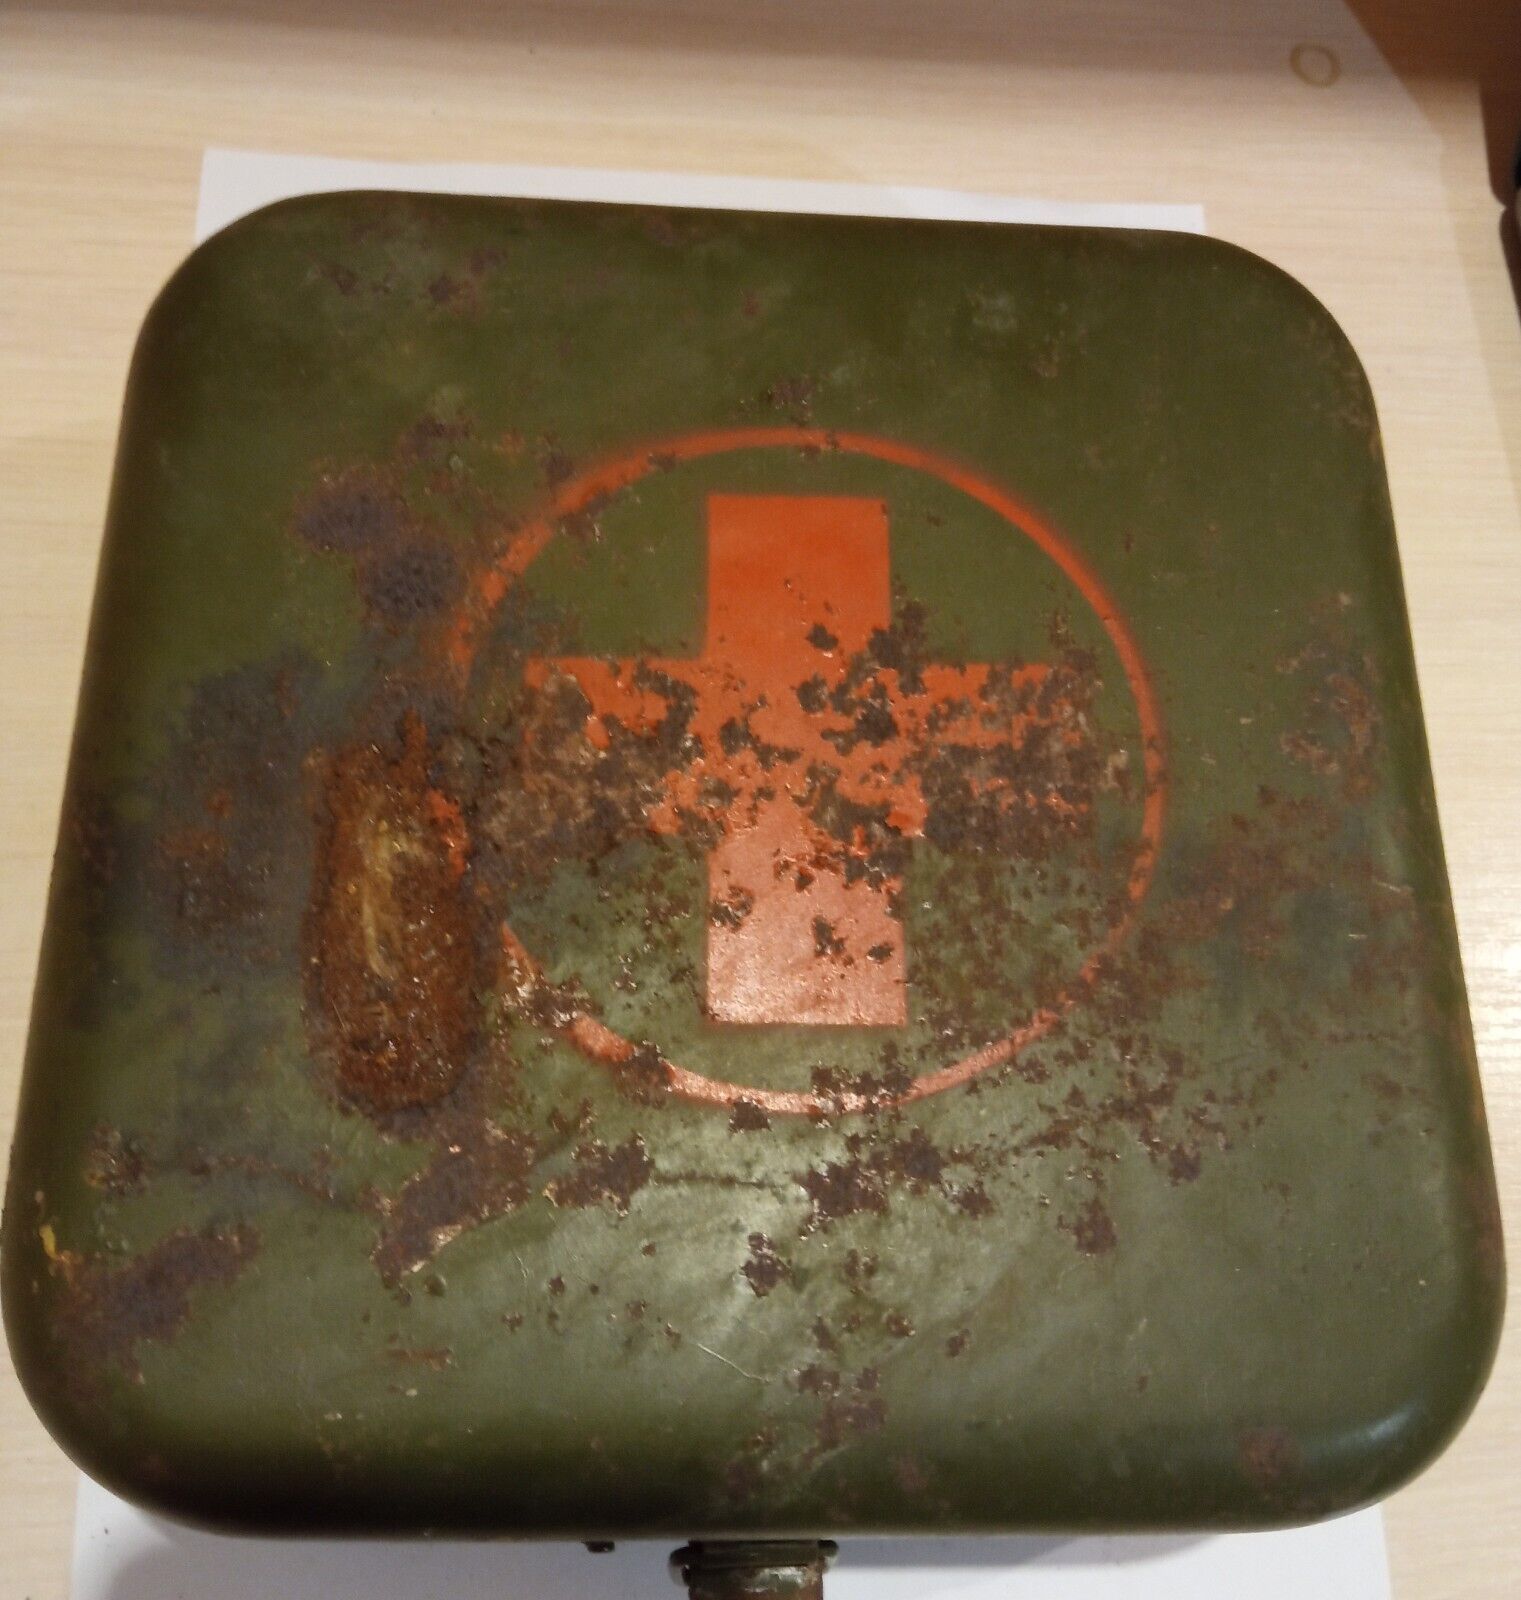 Vintage USSR metal first aid kit for military vehicles